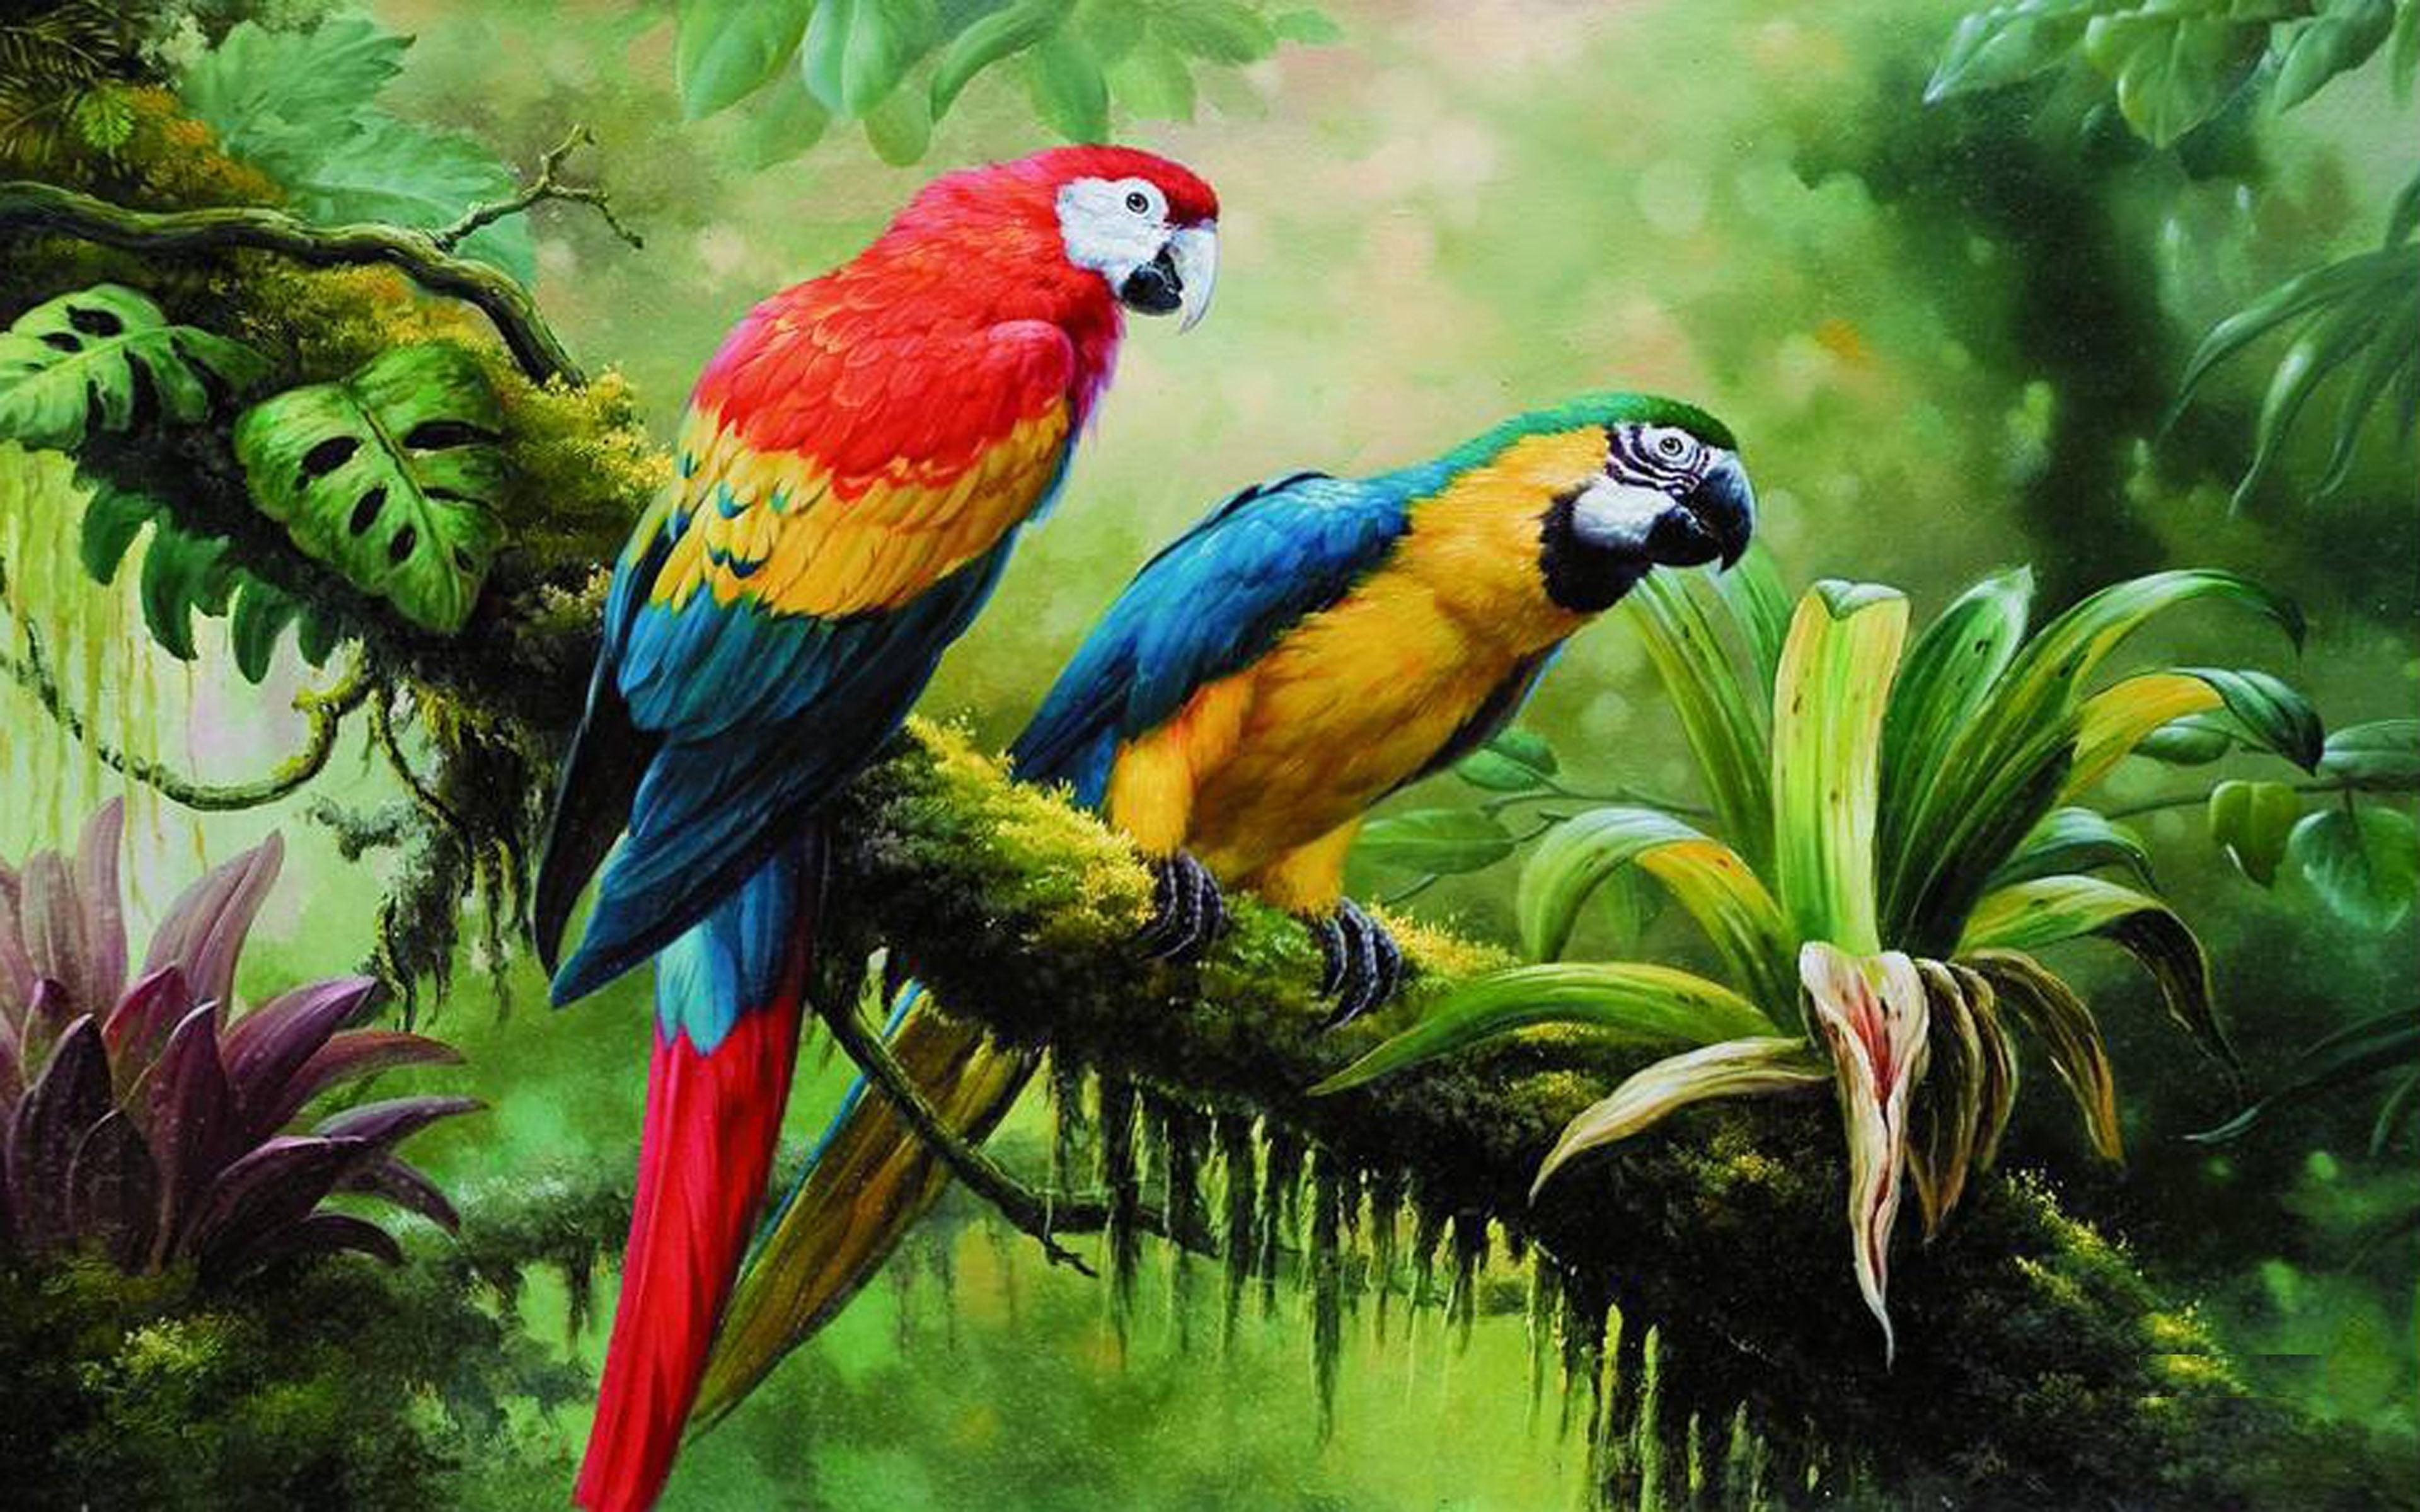 Macaw Parrot Wild Birds From Jungle Rainforest Swamp Green Dense Vegetation Art Photography Parrot On Branch Hd Wallpaper For Pc Tablet And Mobile 3840×2400